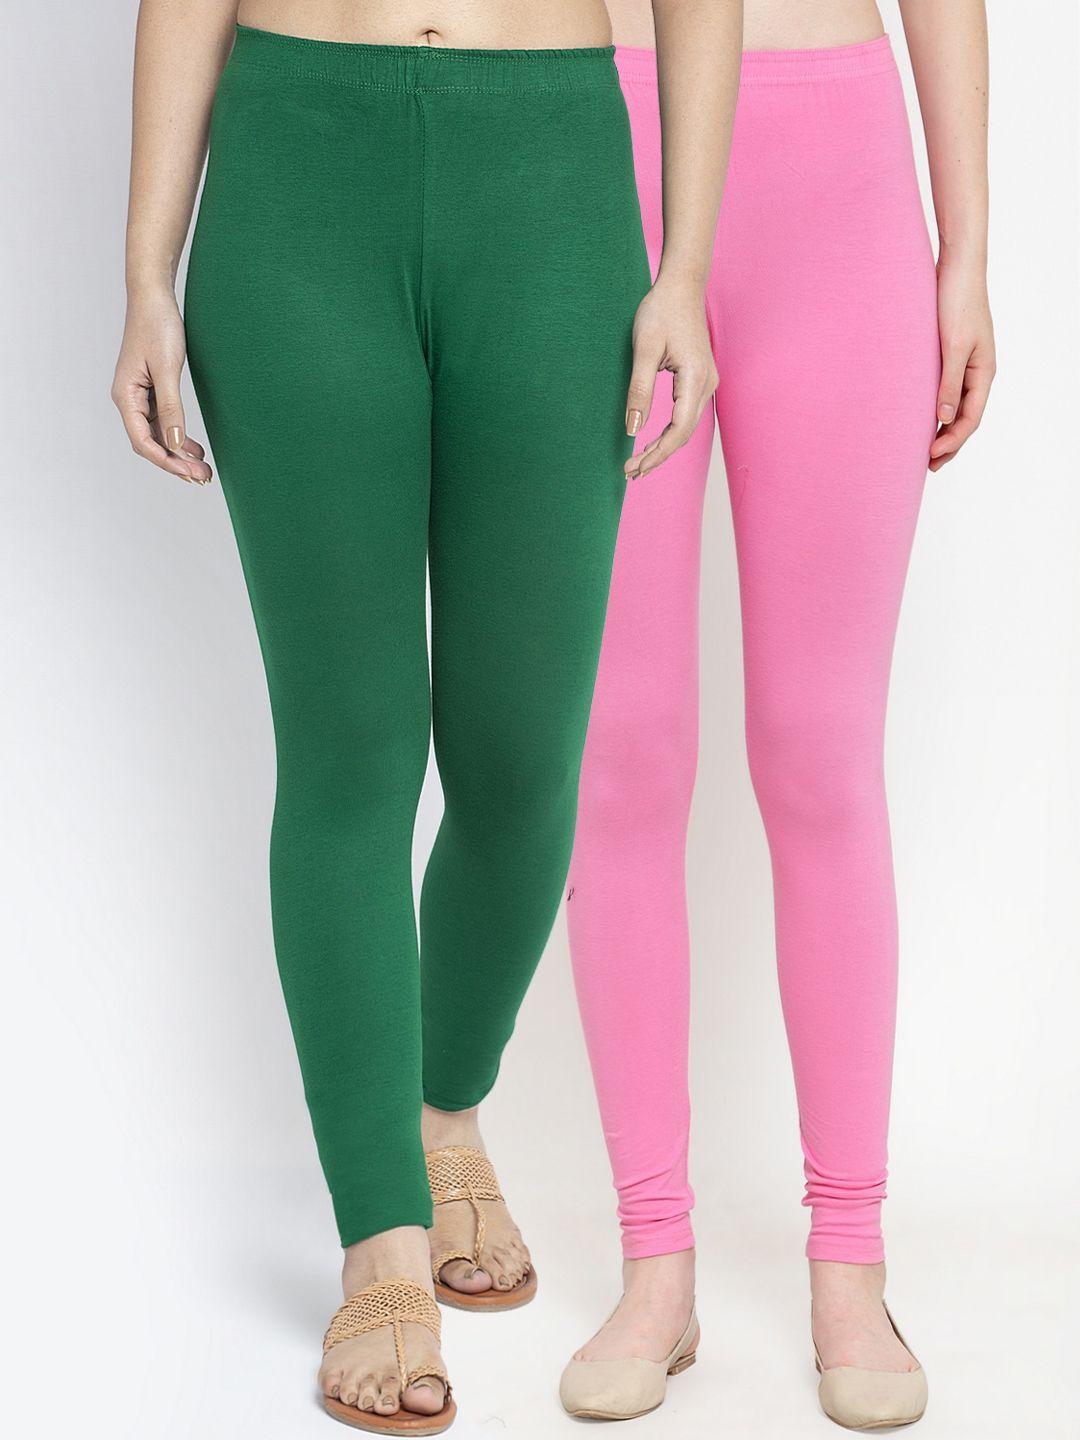 gracit-women-pack-of-2-pink-green-solid-ankle-length-combed-cotton-leggings